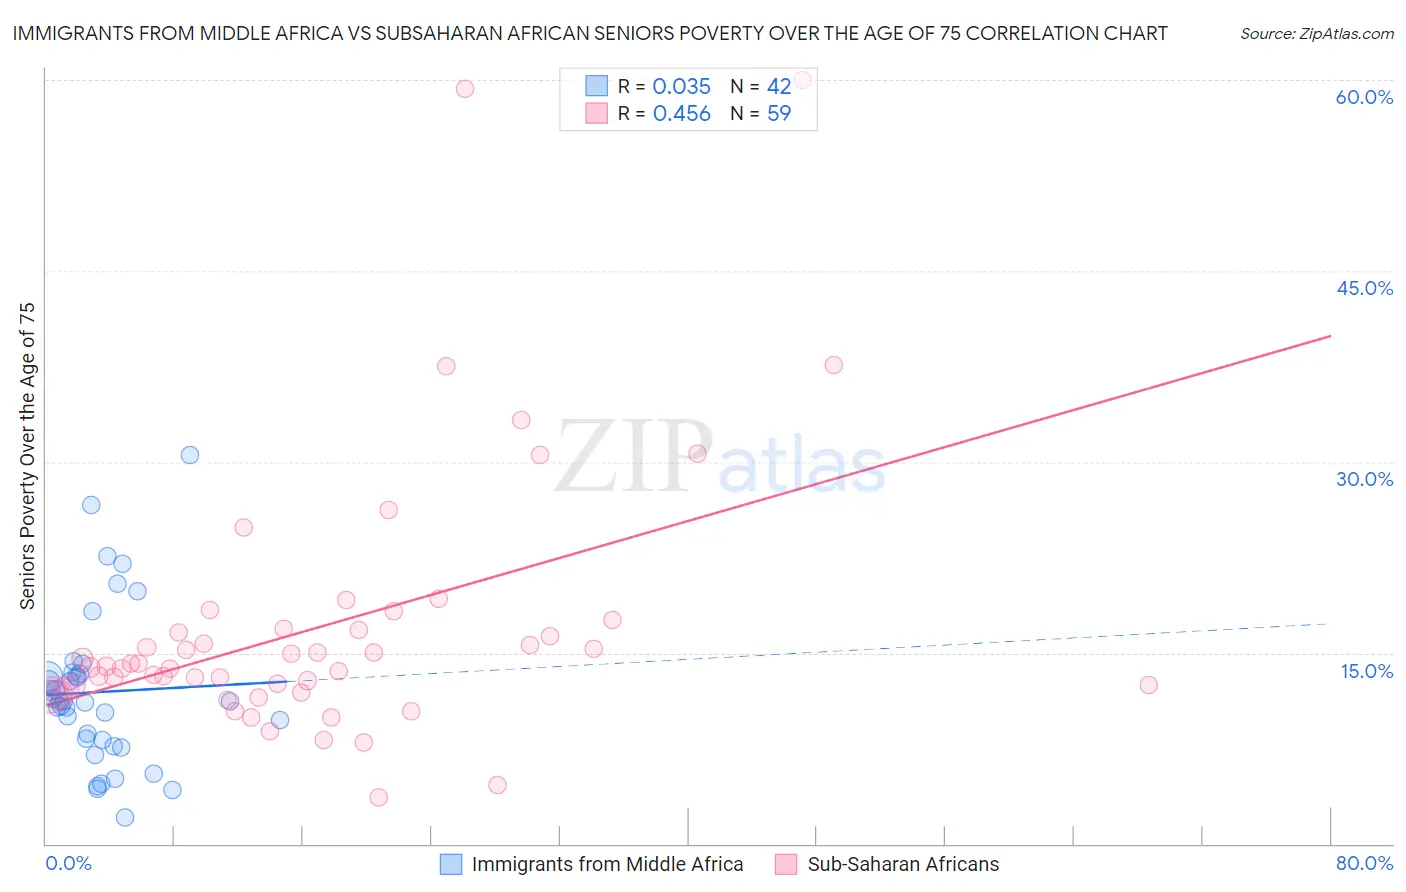 Immigrants from Middle Africa vs Subsaharan African Seniors Poverty Over the Age of 75